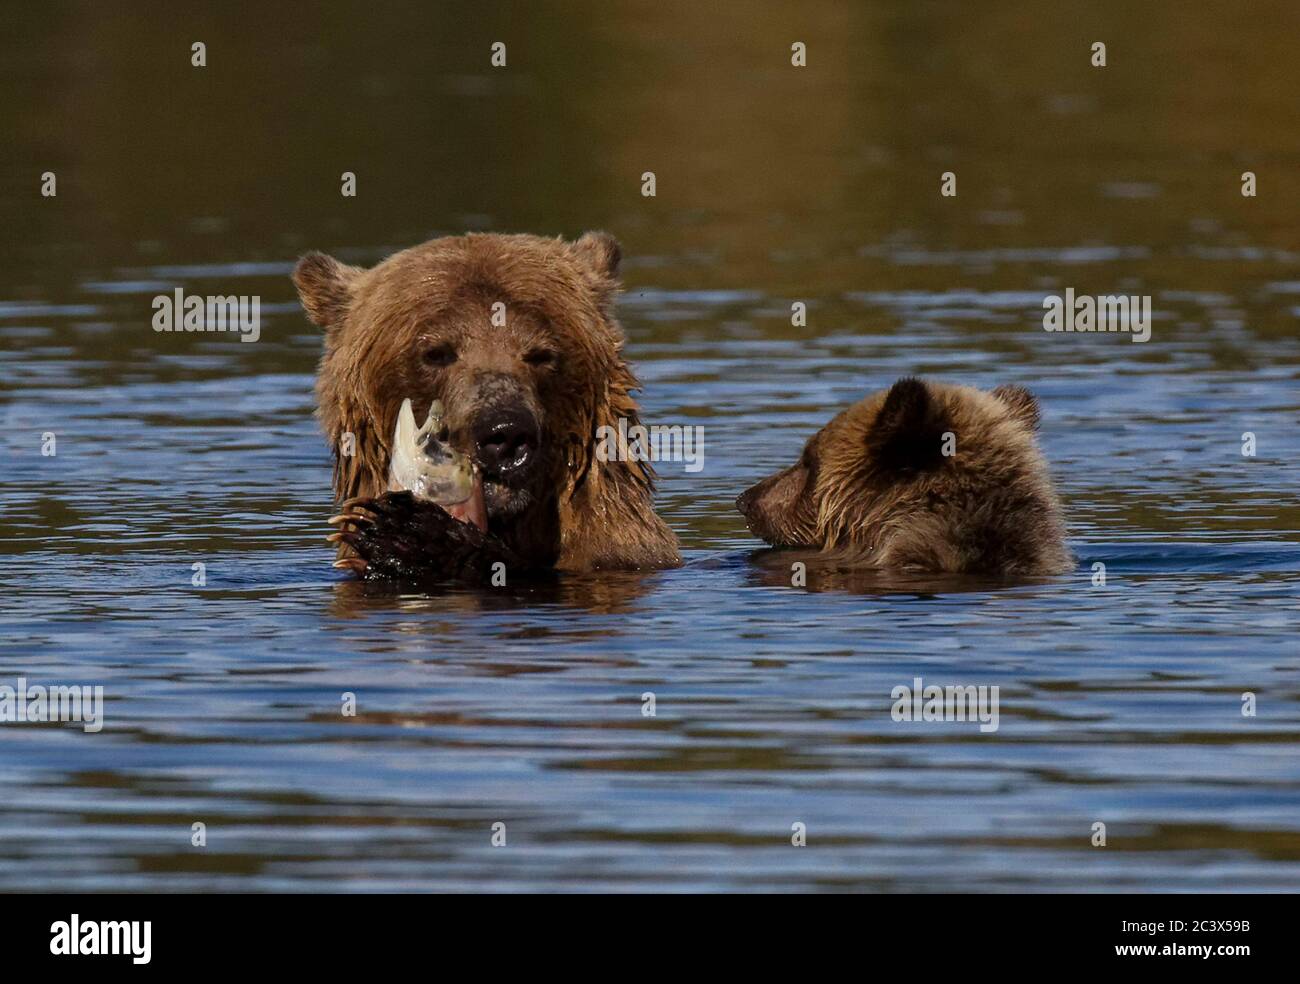 GRIZZLY BEARS CUBS LEARNING TO FISH Stock Photo